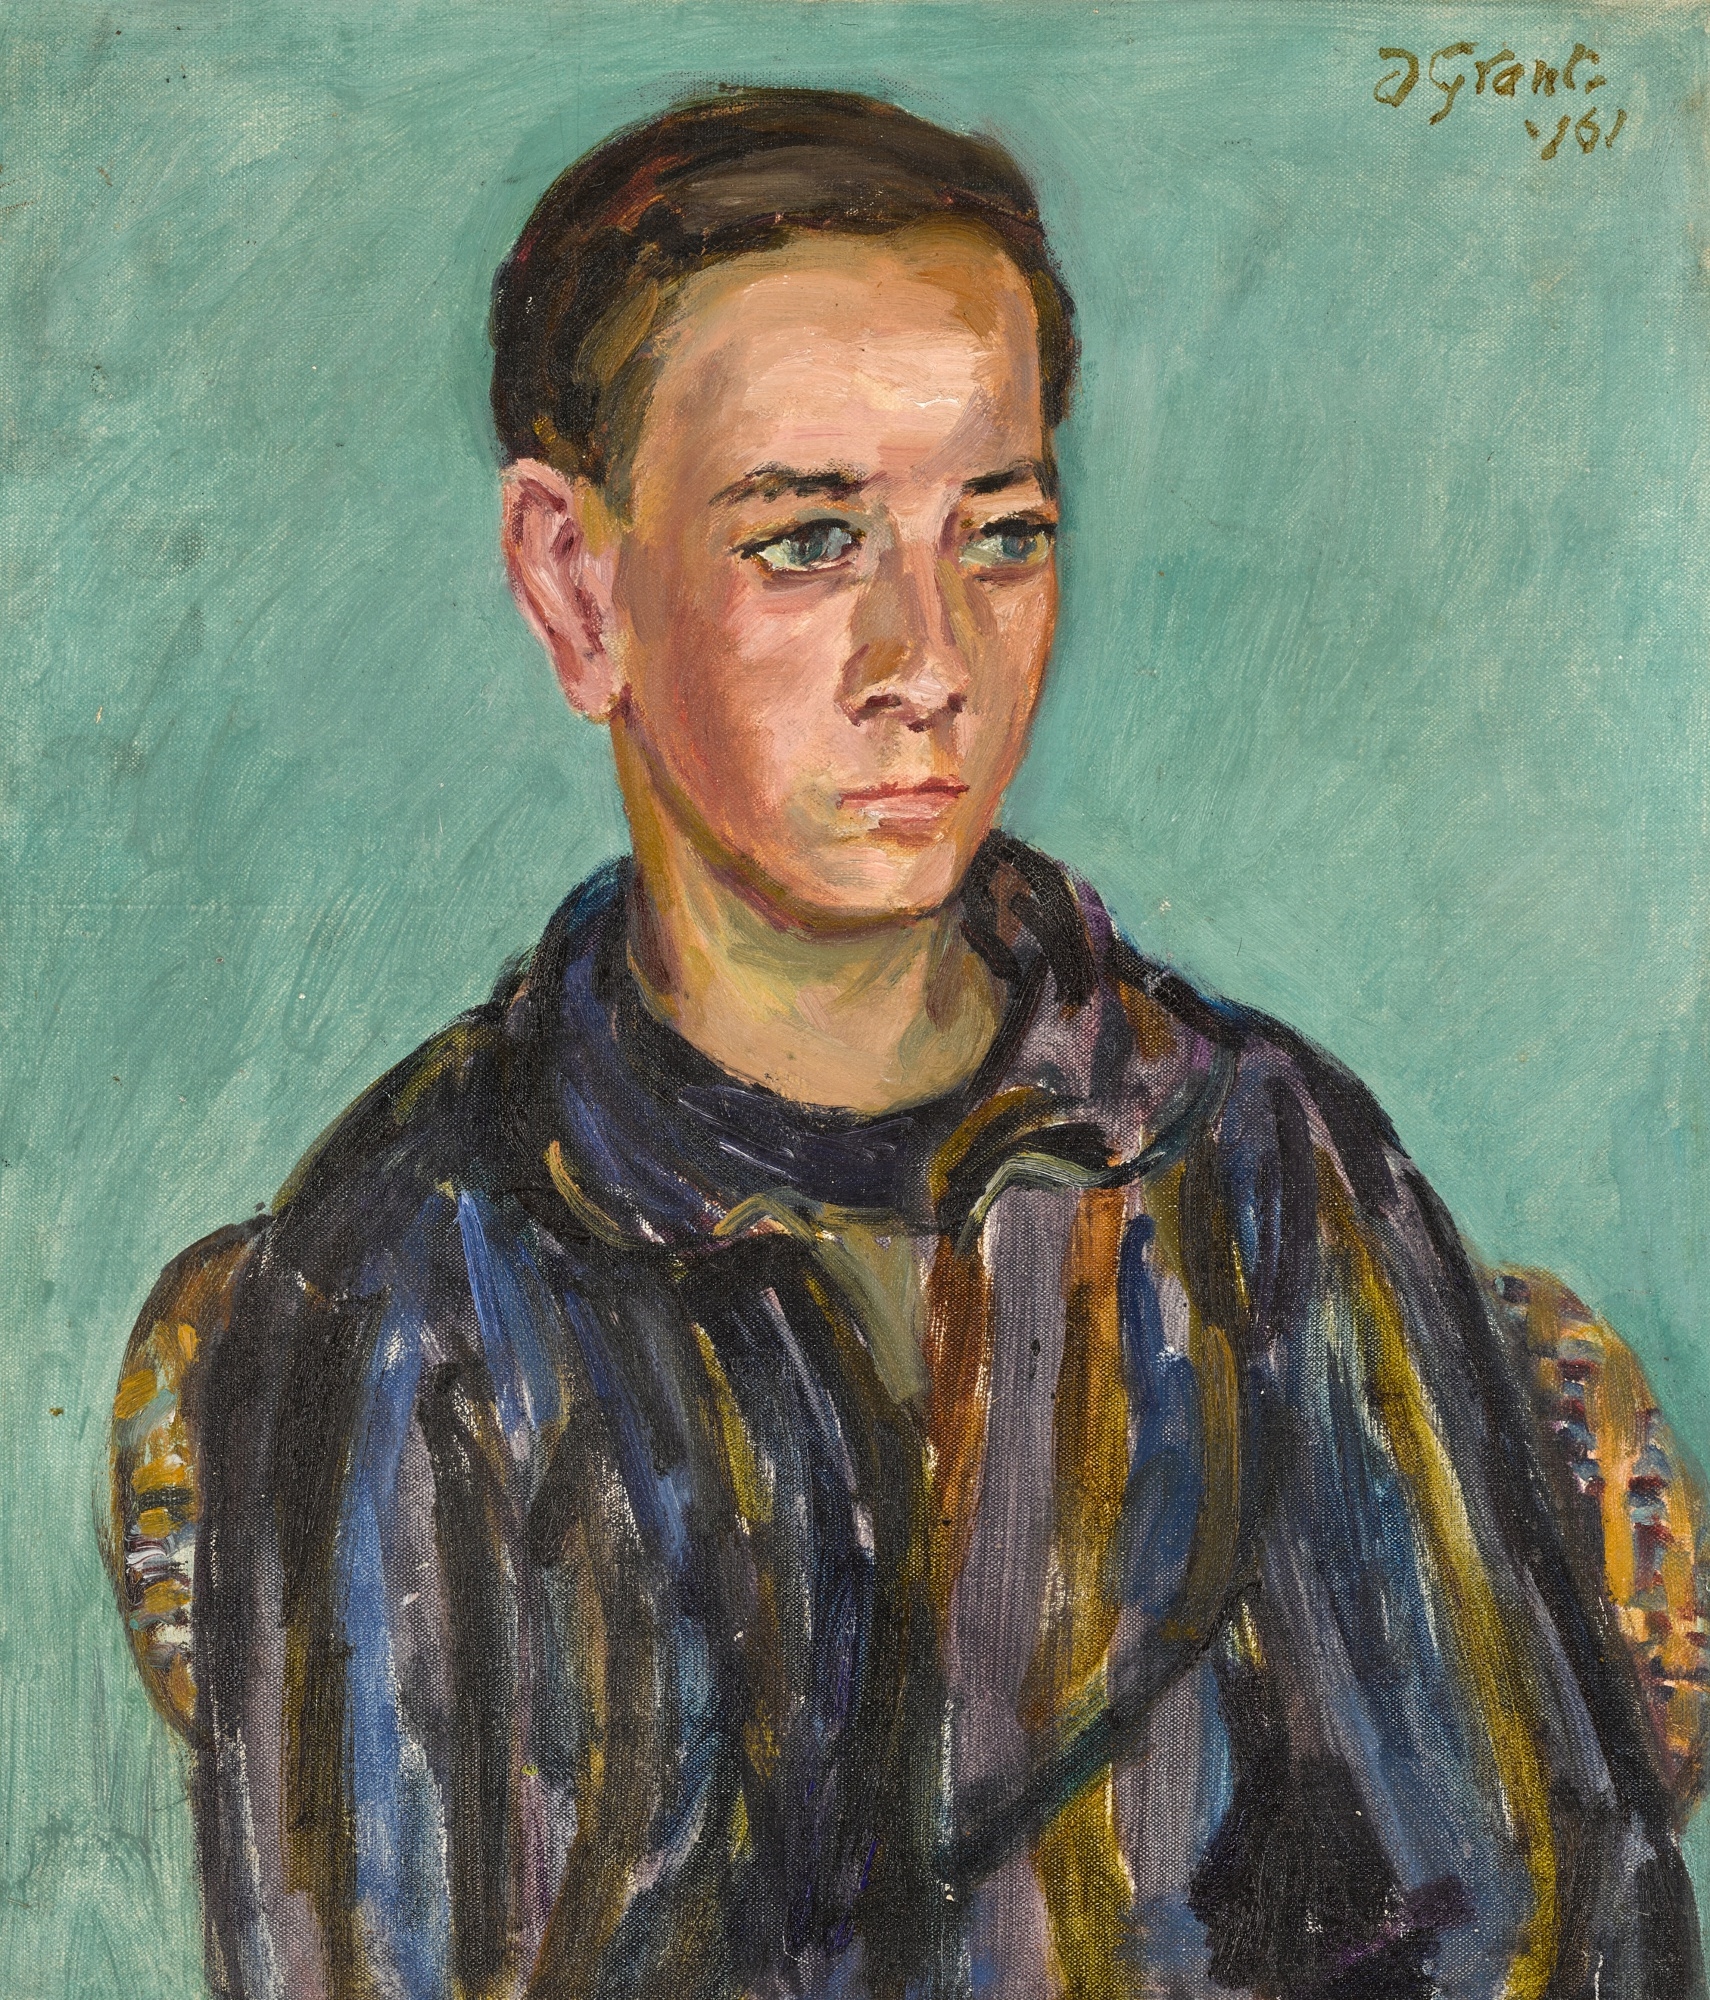 Artwork by Duncan Grant, Portrait of a Young Man, Made of oil on canvas board